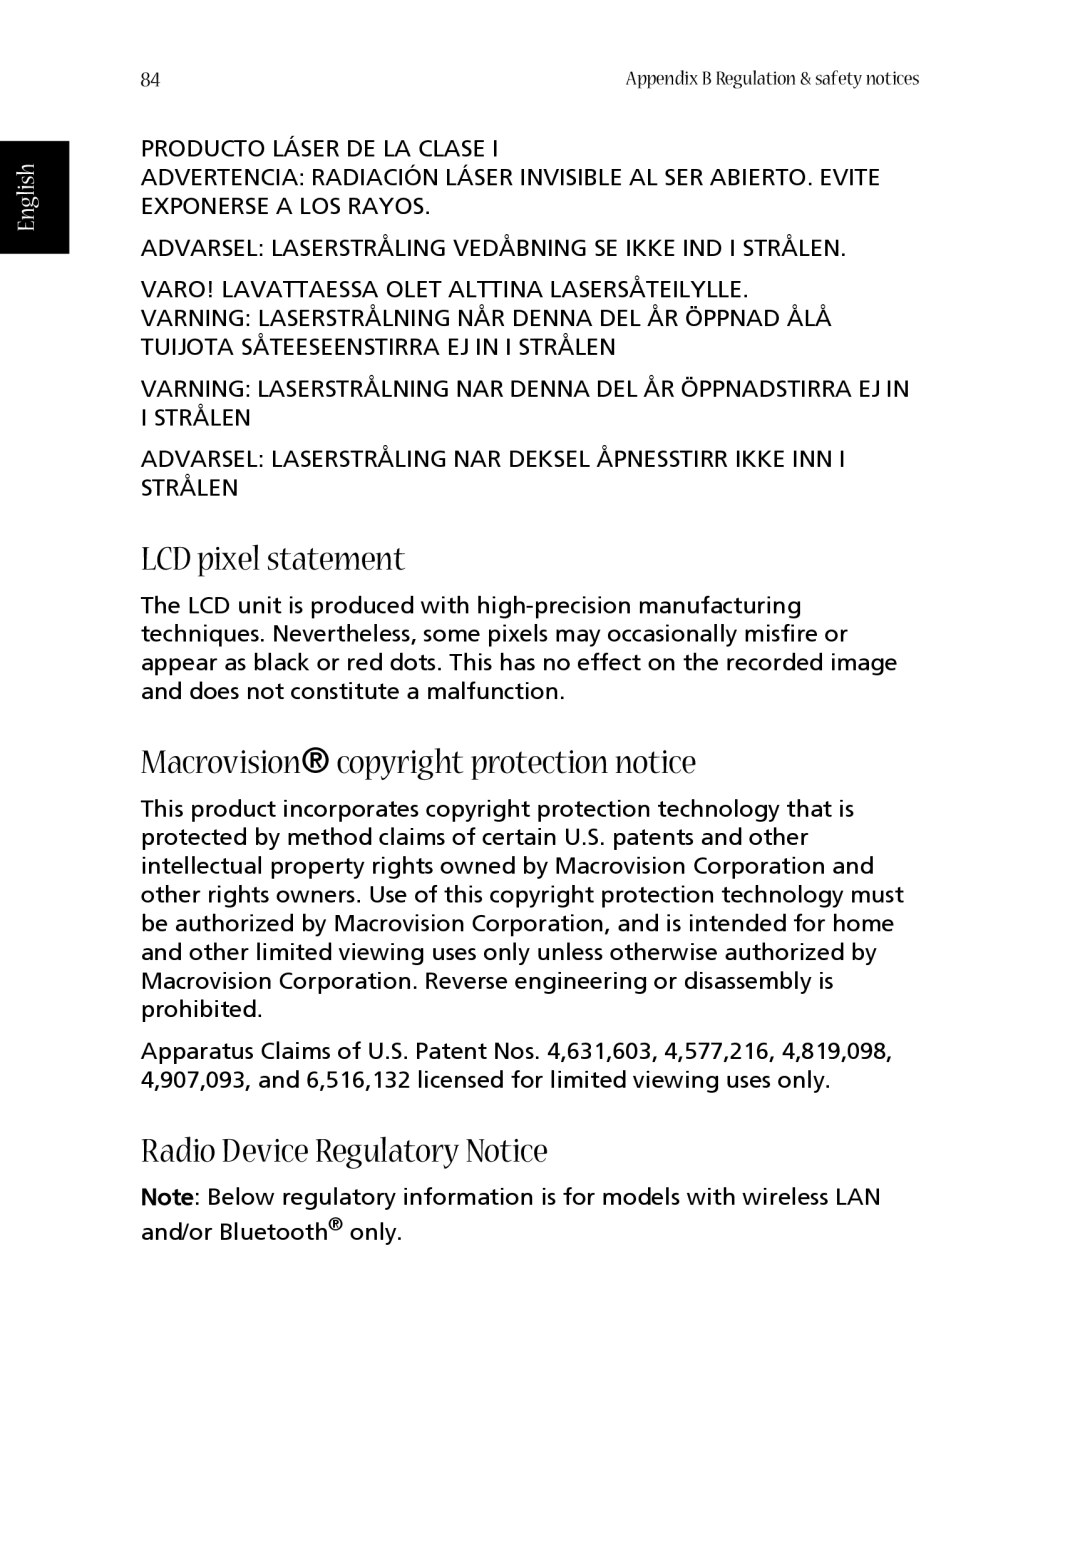 Acer 1360 manual LCD pixel statement, Macrovision copyright protection notice, Radio Device Regulatory Notice, English 